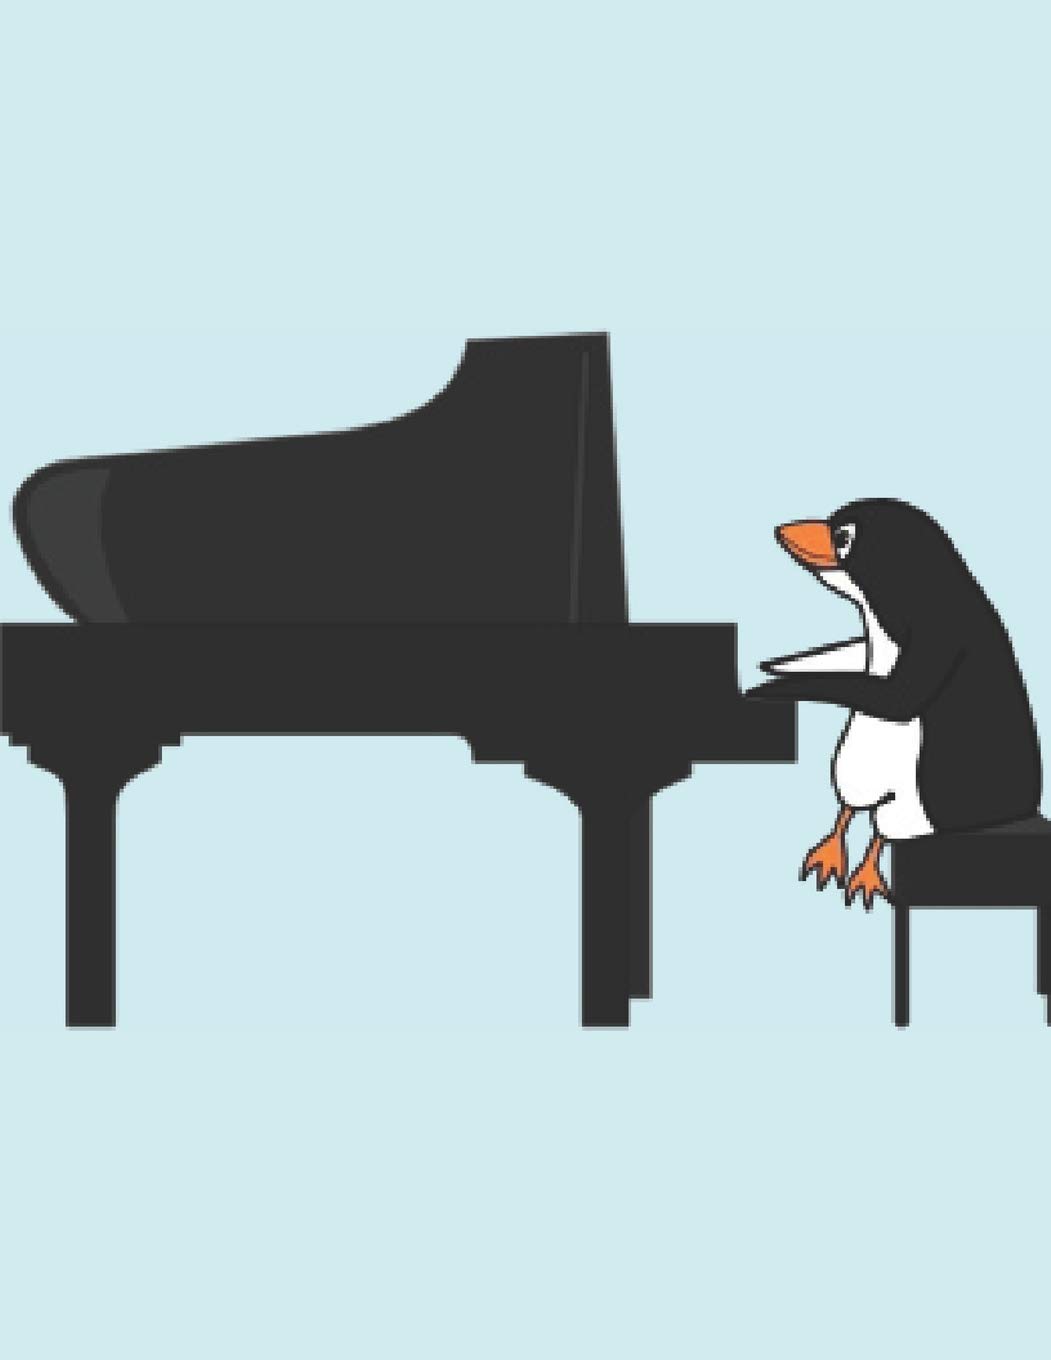 Pinguin playing the piano